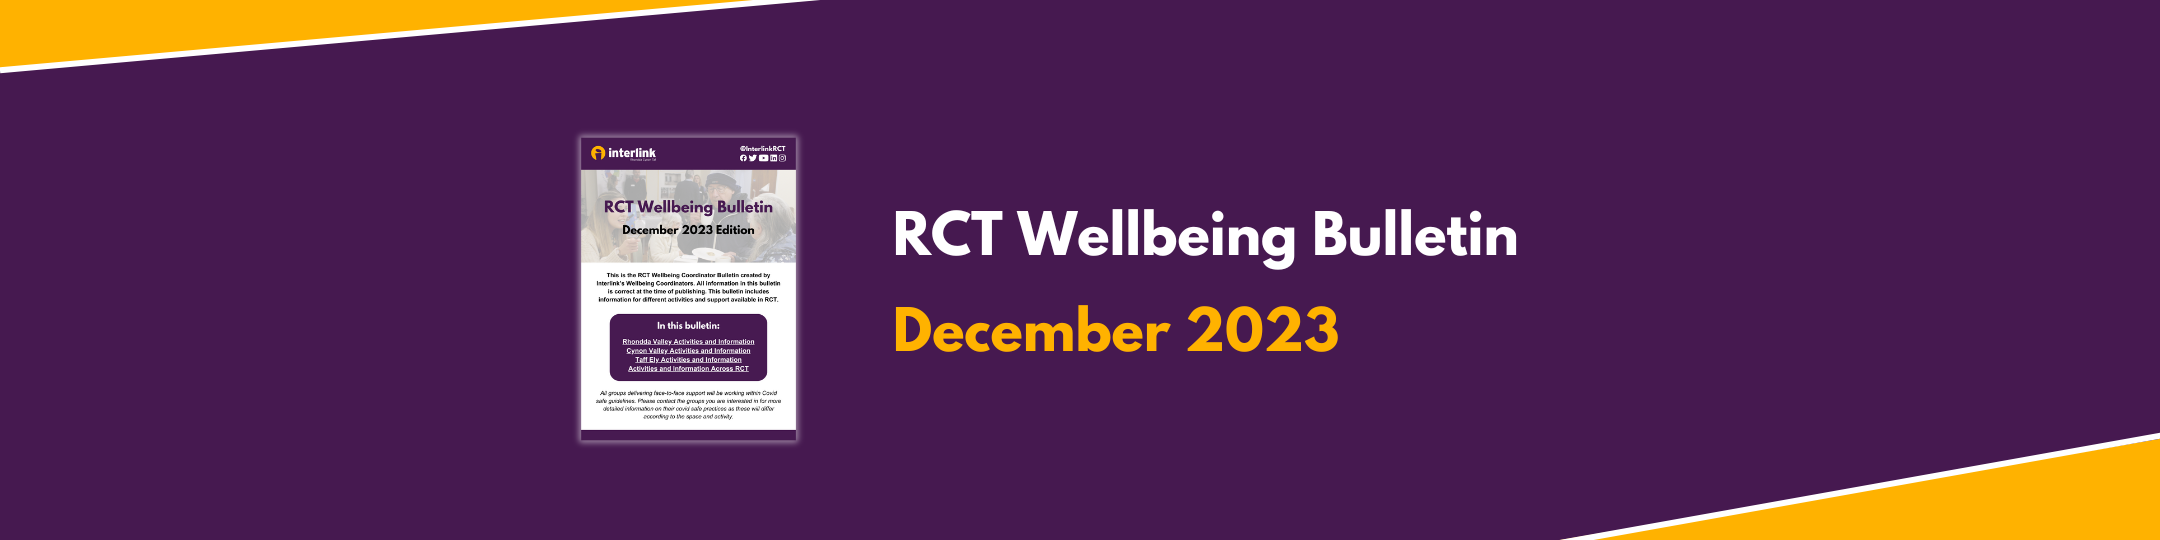 RCT Wellbeing Bulletin - December 2023